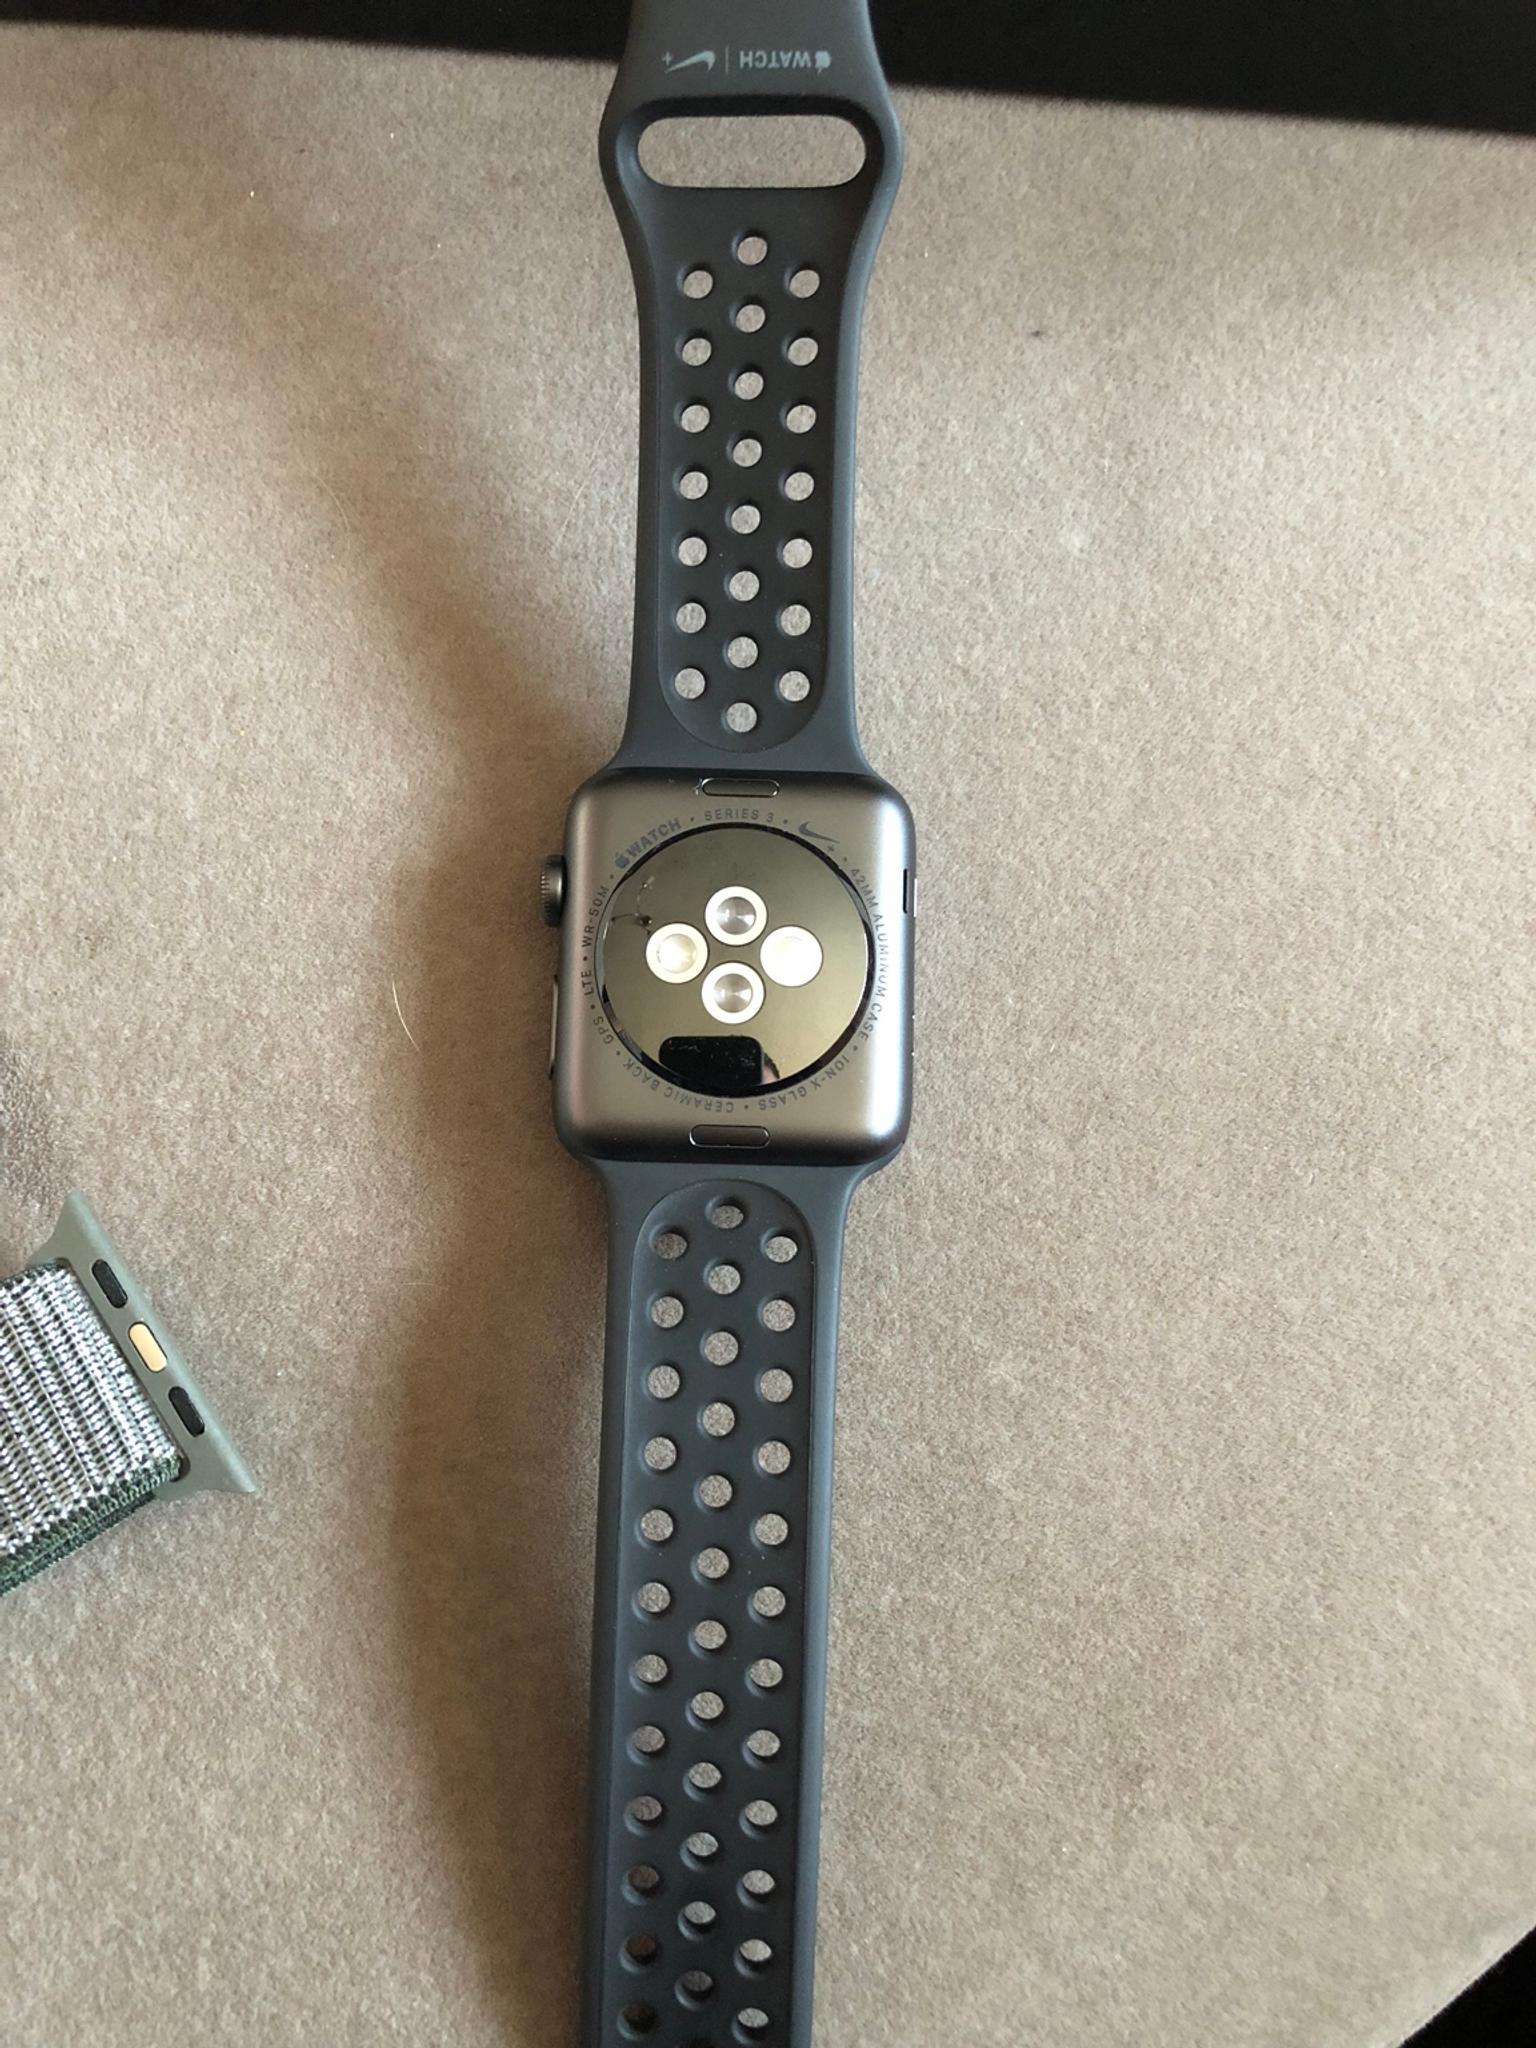 nike apple watch series 3 with cellular